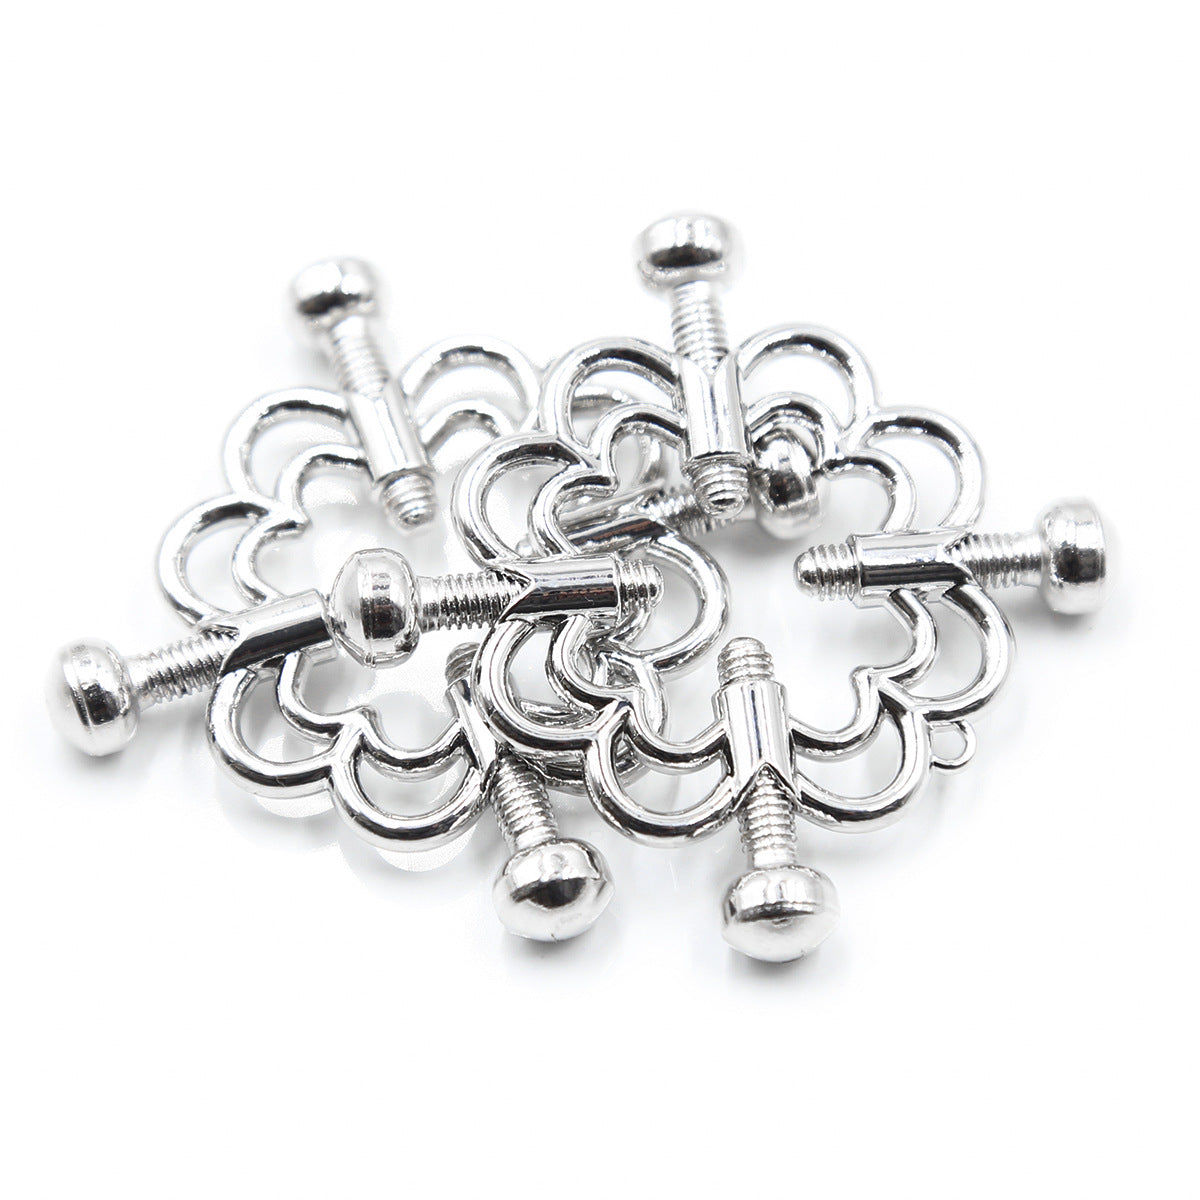 Flower Shaped Screw Tightening Nipple Clamps